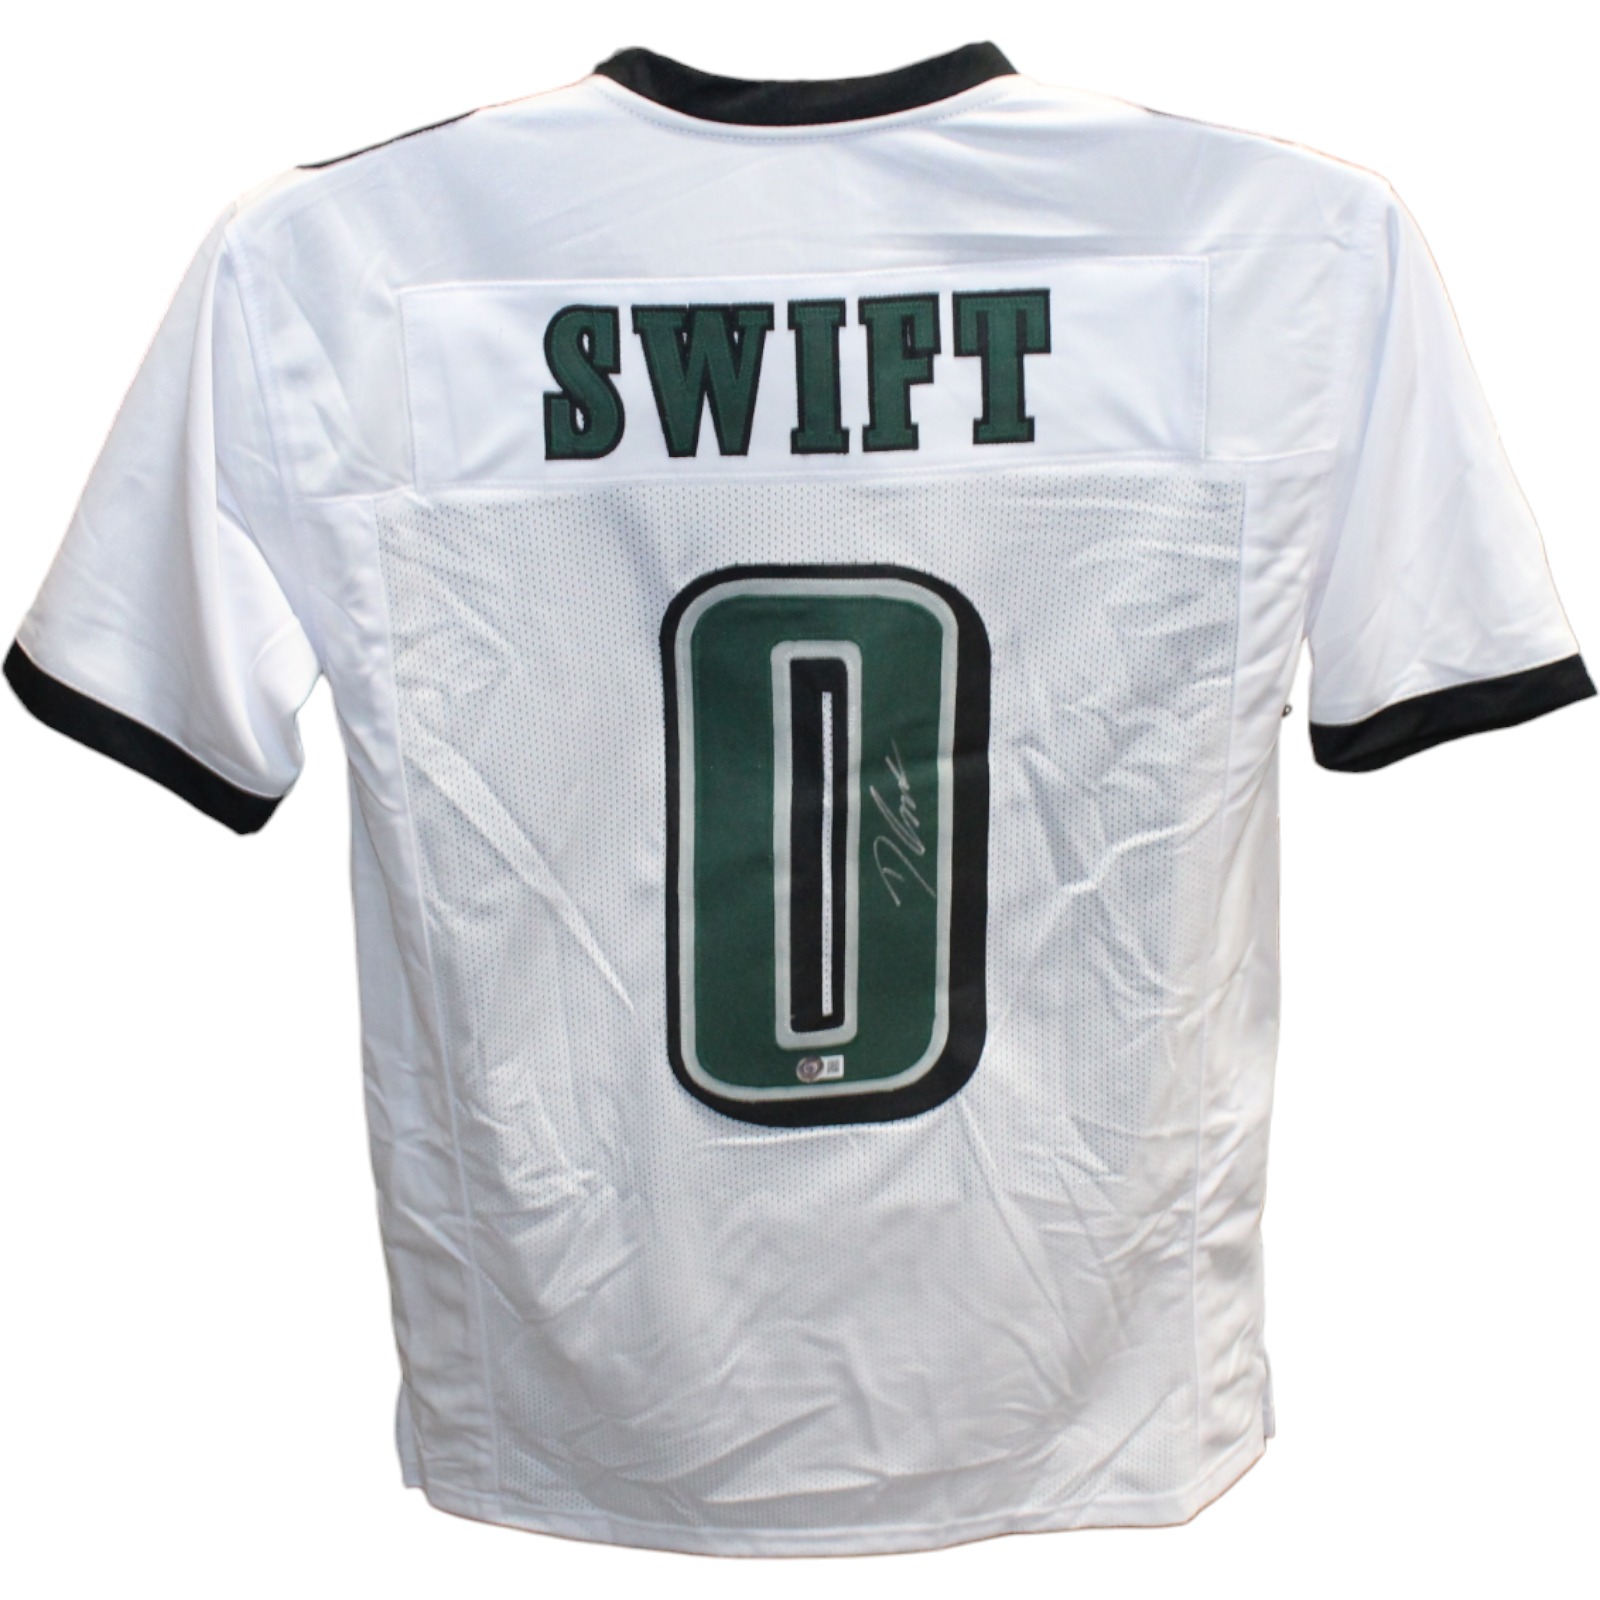 D'Andre Swift Autographed/Signed Pro Style White Jersey Beckett